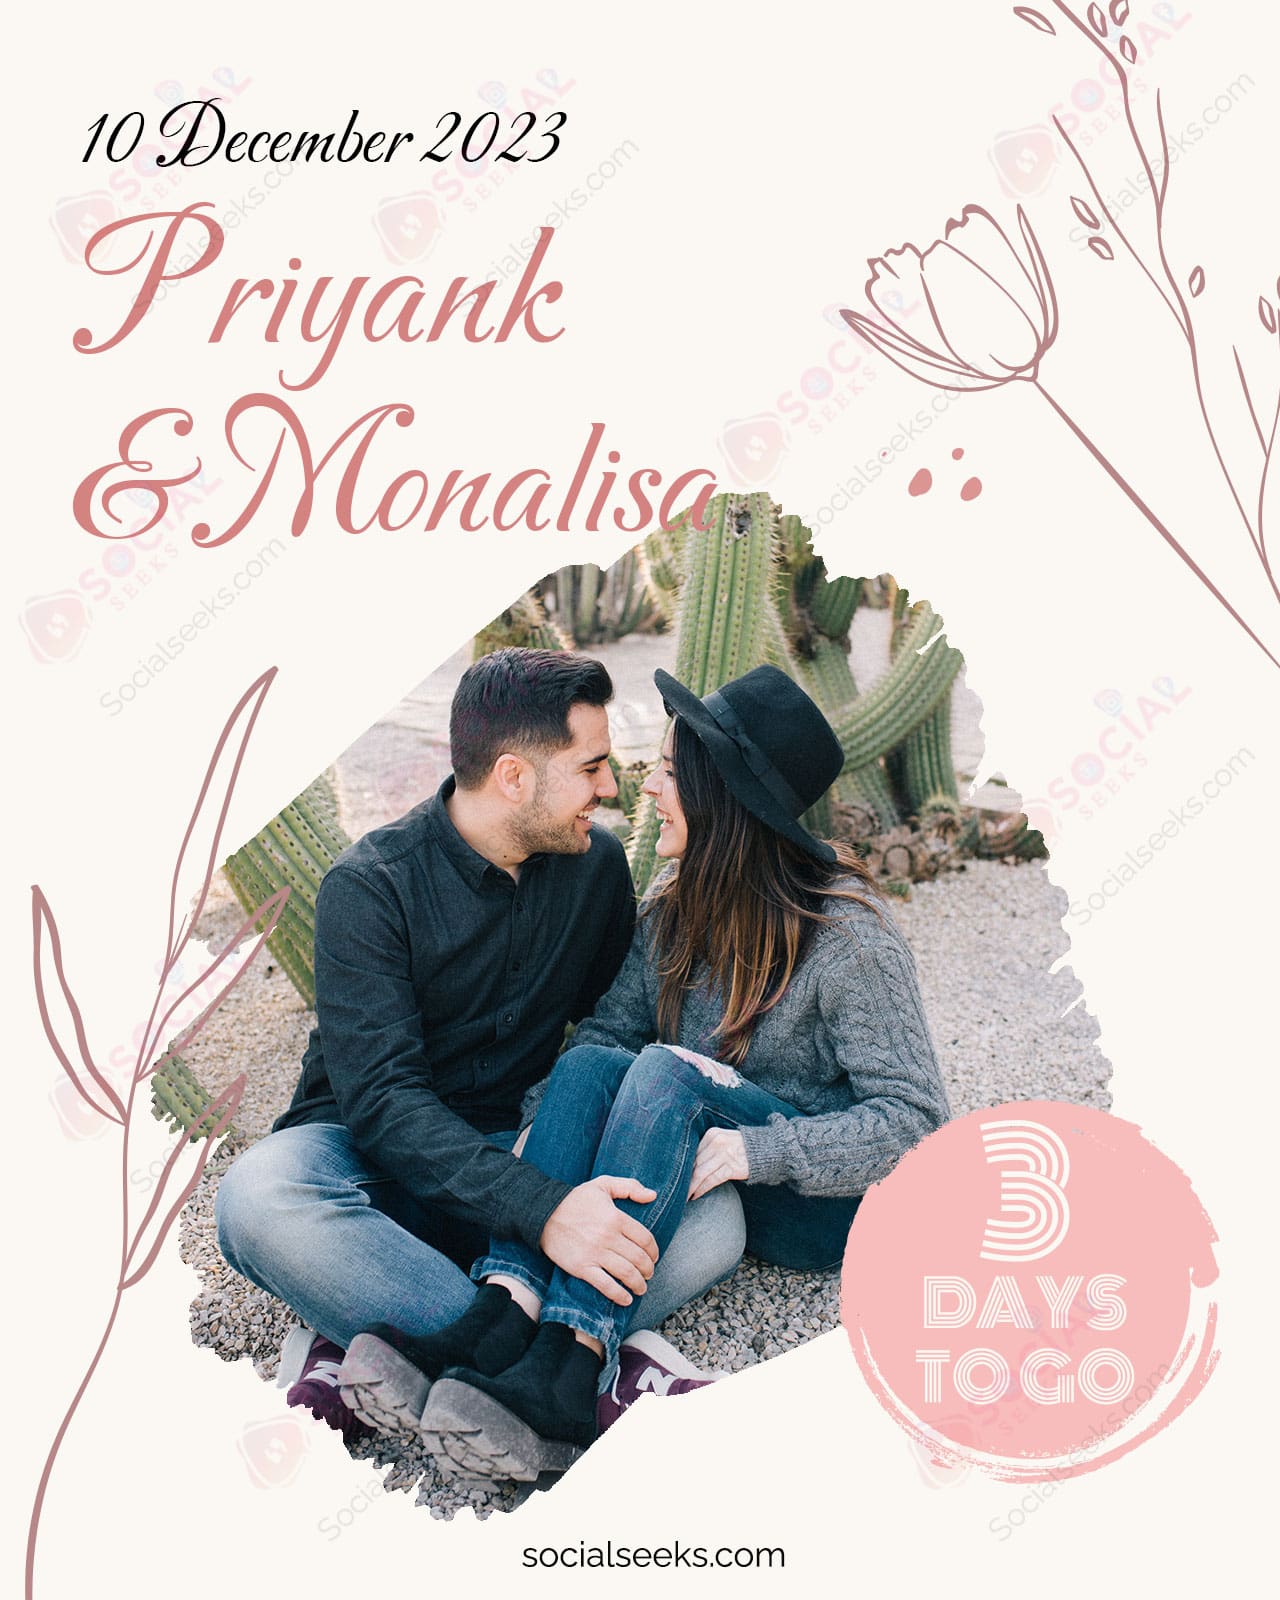 3 Days to go marriage countdown save the date photo frame with couple name